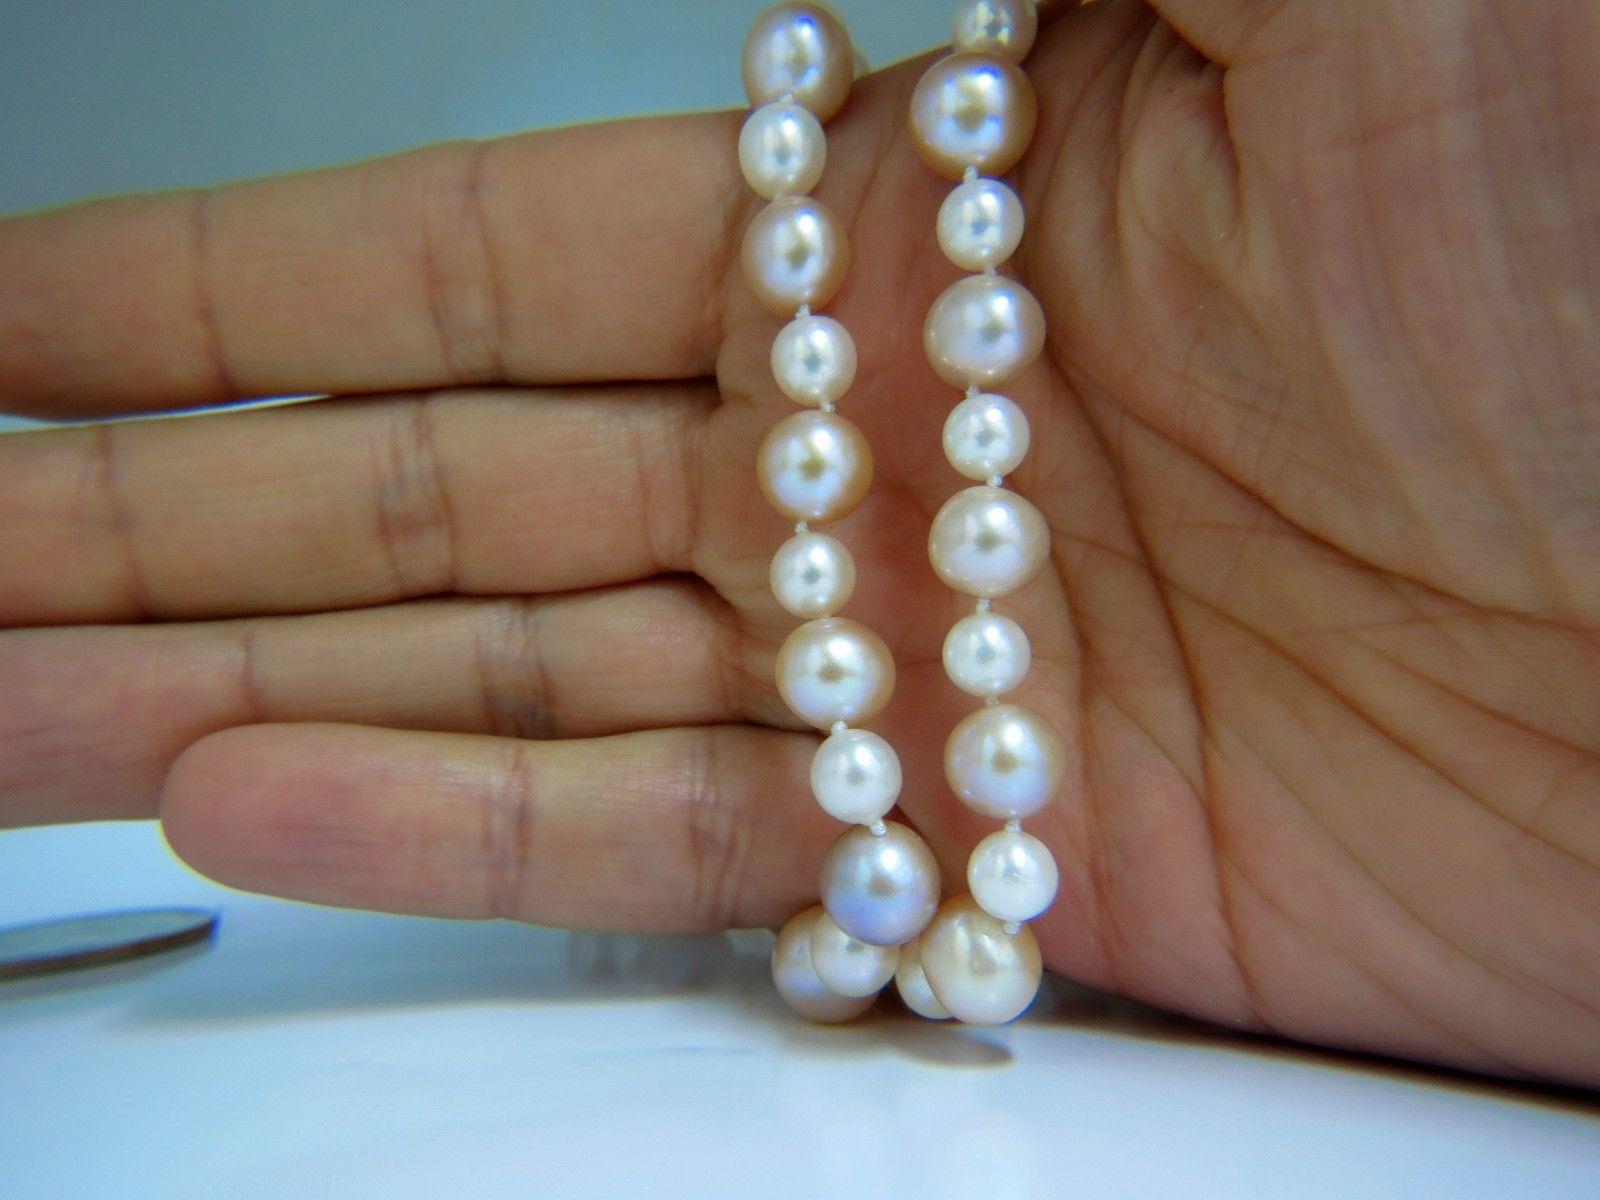 9.7mm Natural Fresh Water & Akoya Pearls Necklace

AAA Quality

Endless necklace / can be worn as double wrap

Necklace: 30 inch long.

Alternating pink, white pearls